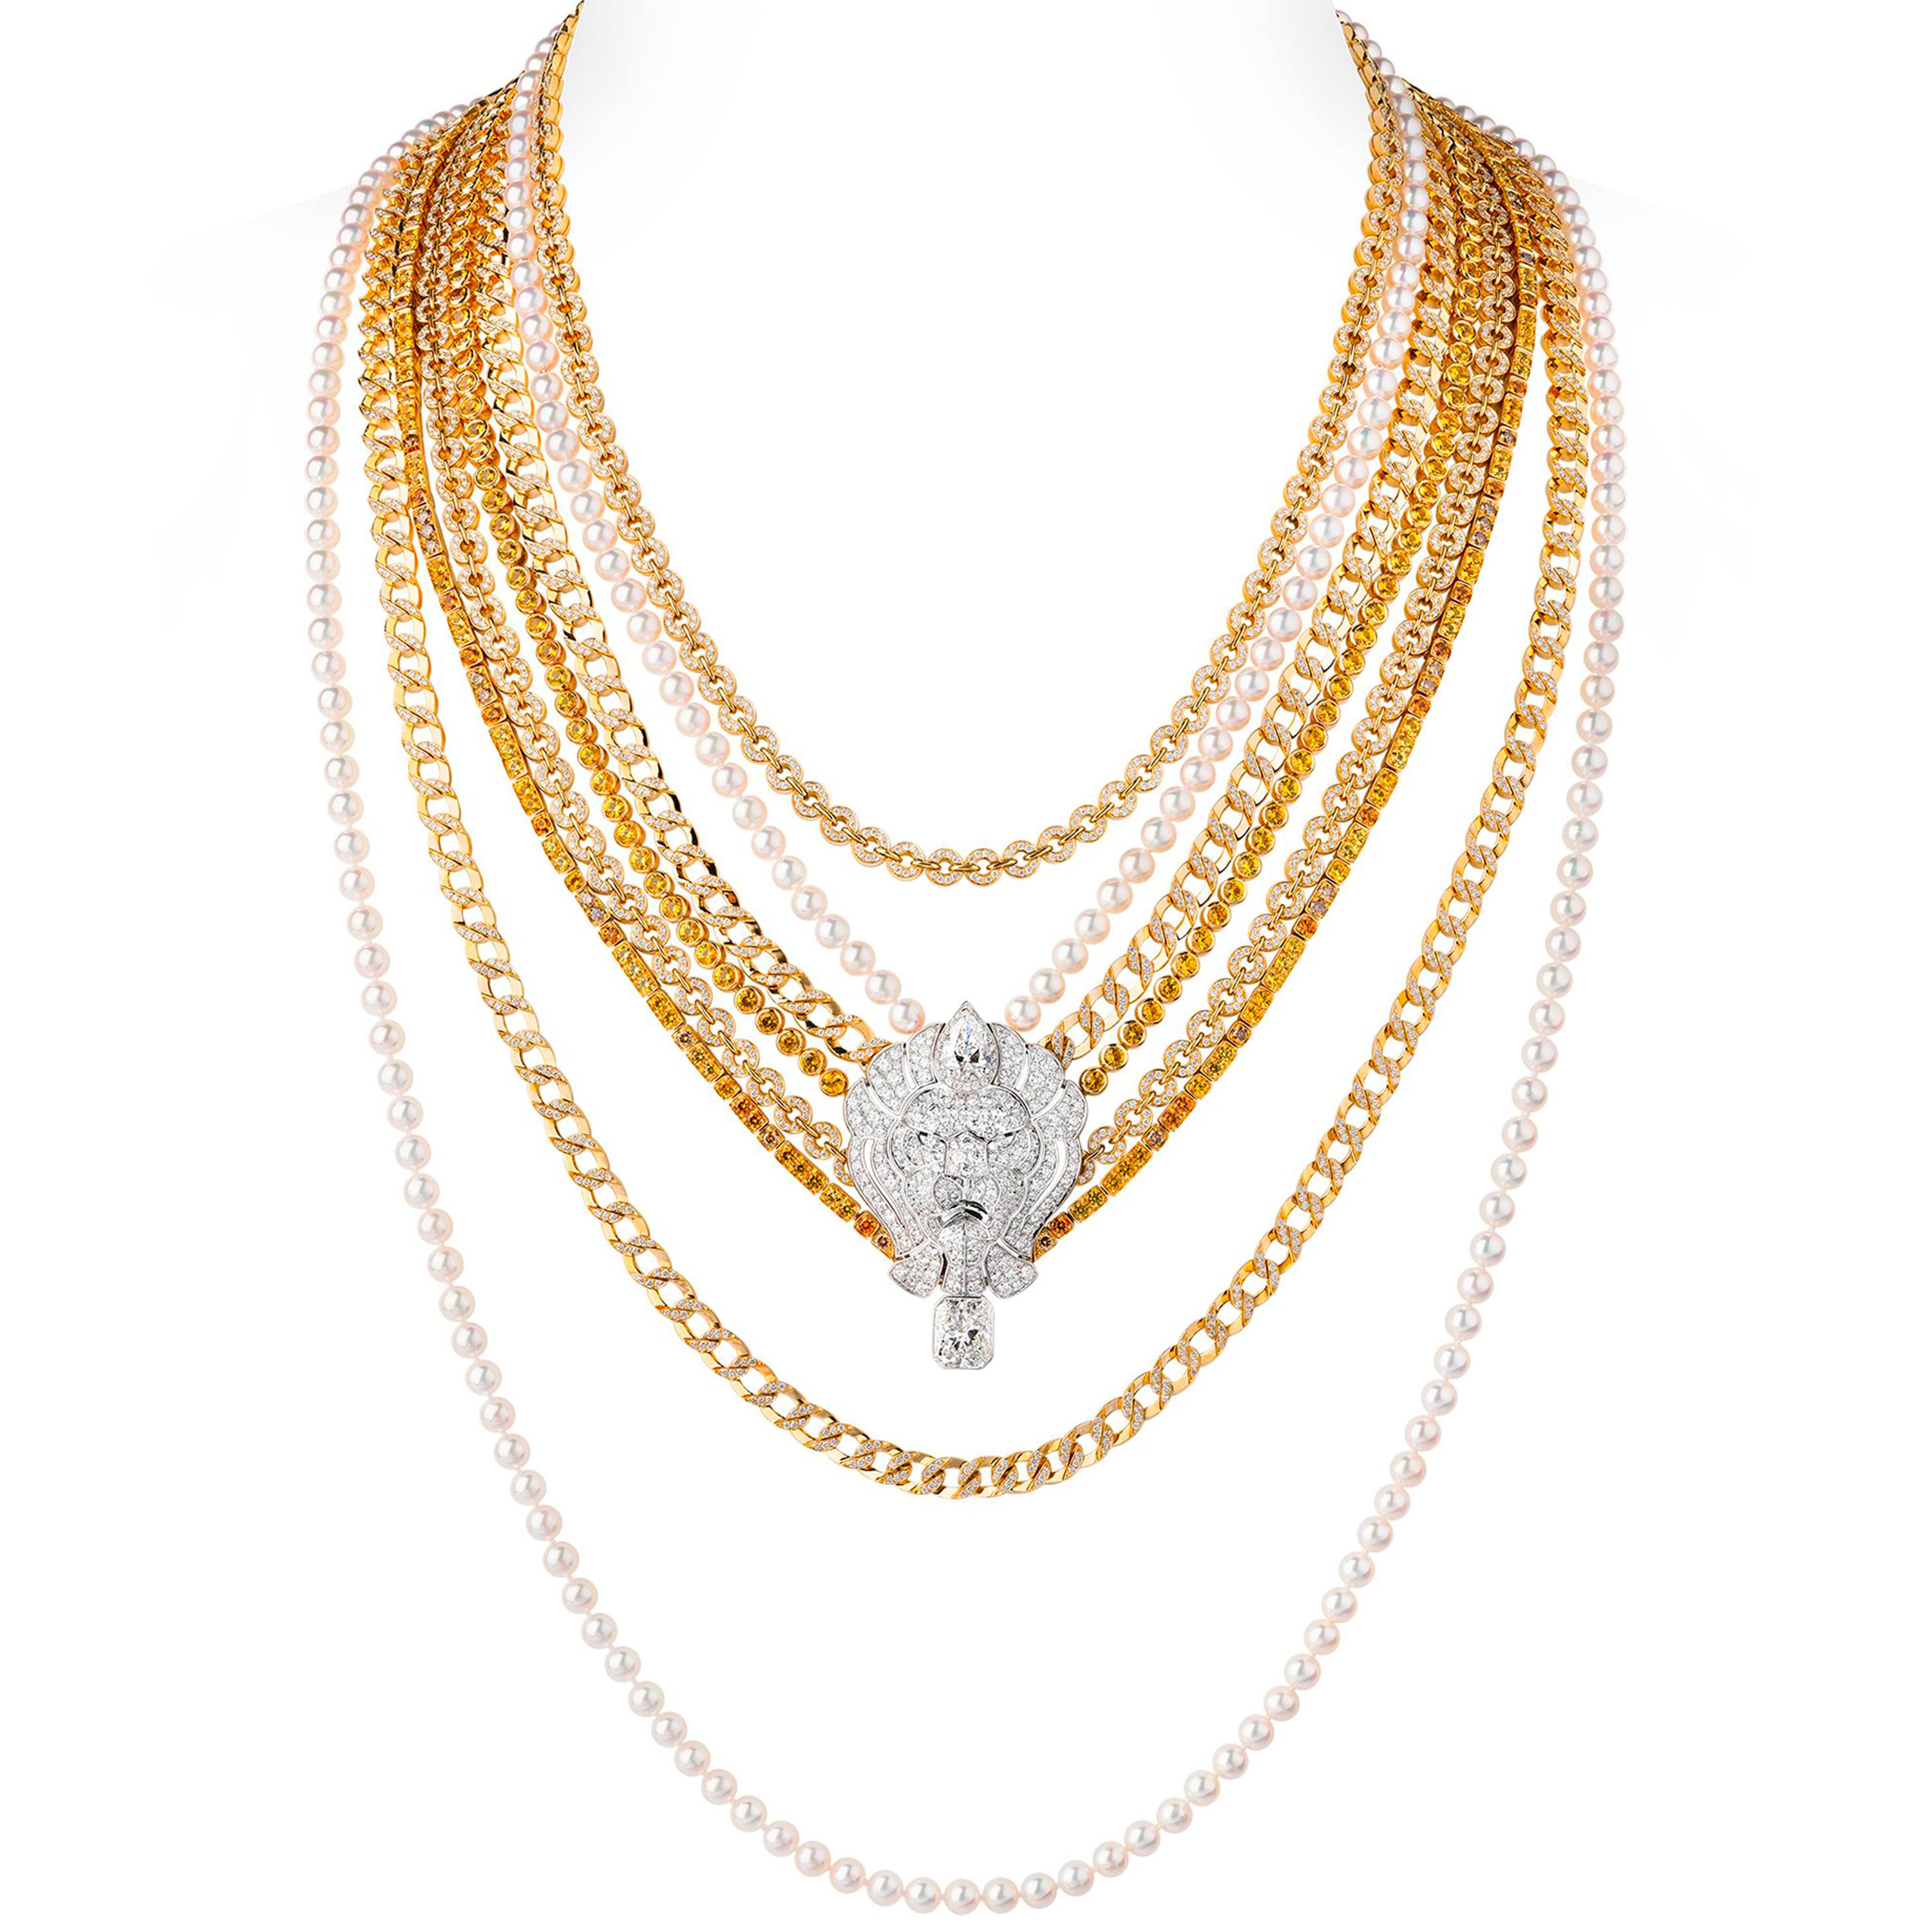 Chanel High Jewelry necklace in 18k white and yellow gold from the L’Esprit du Lion collection